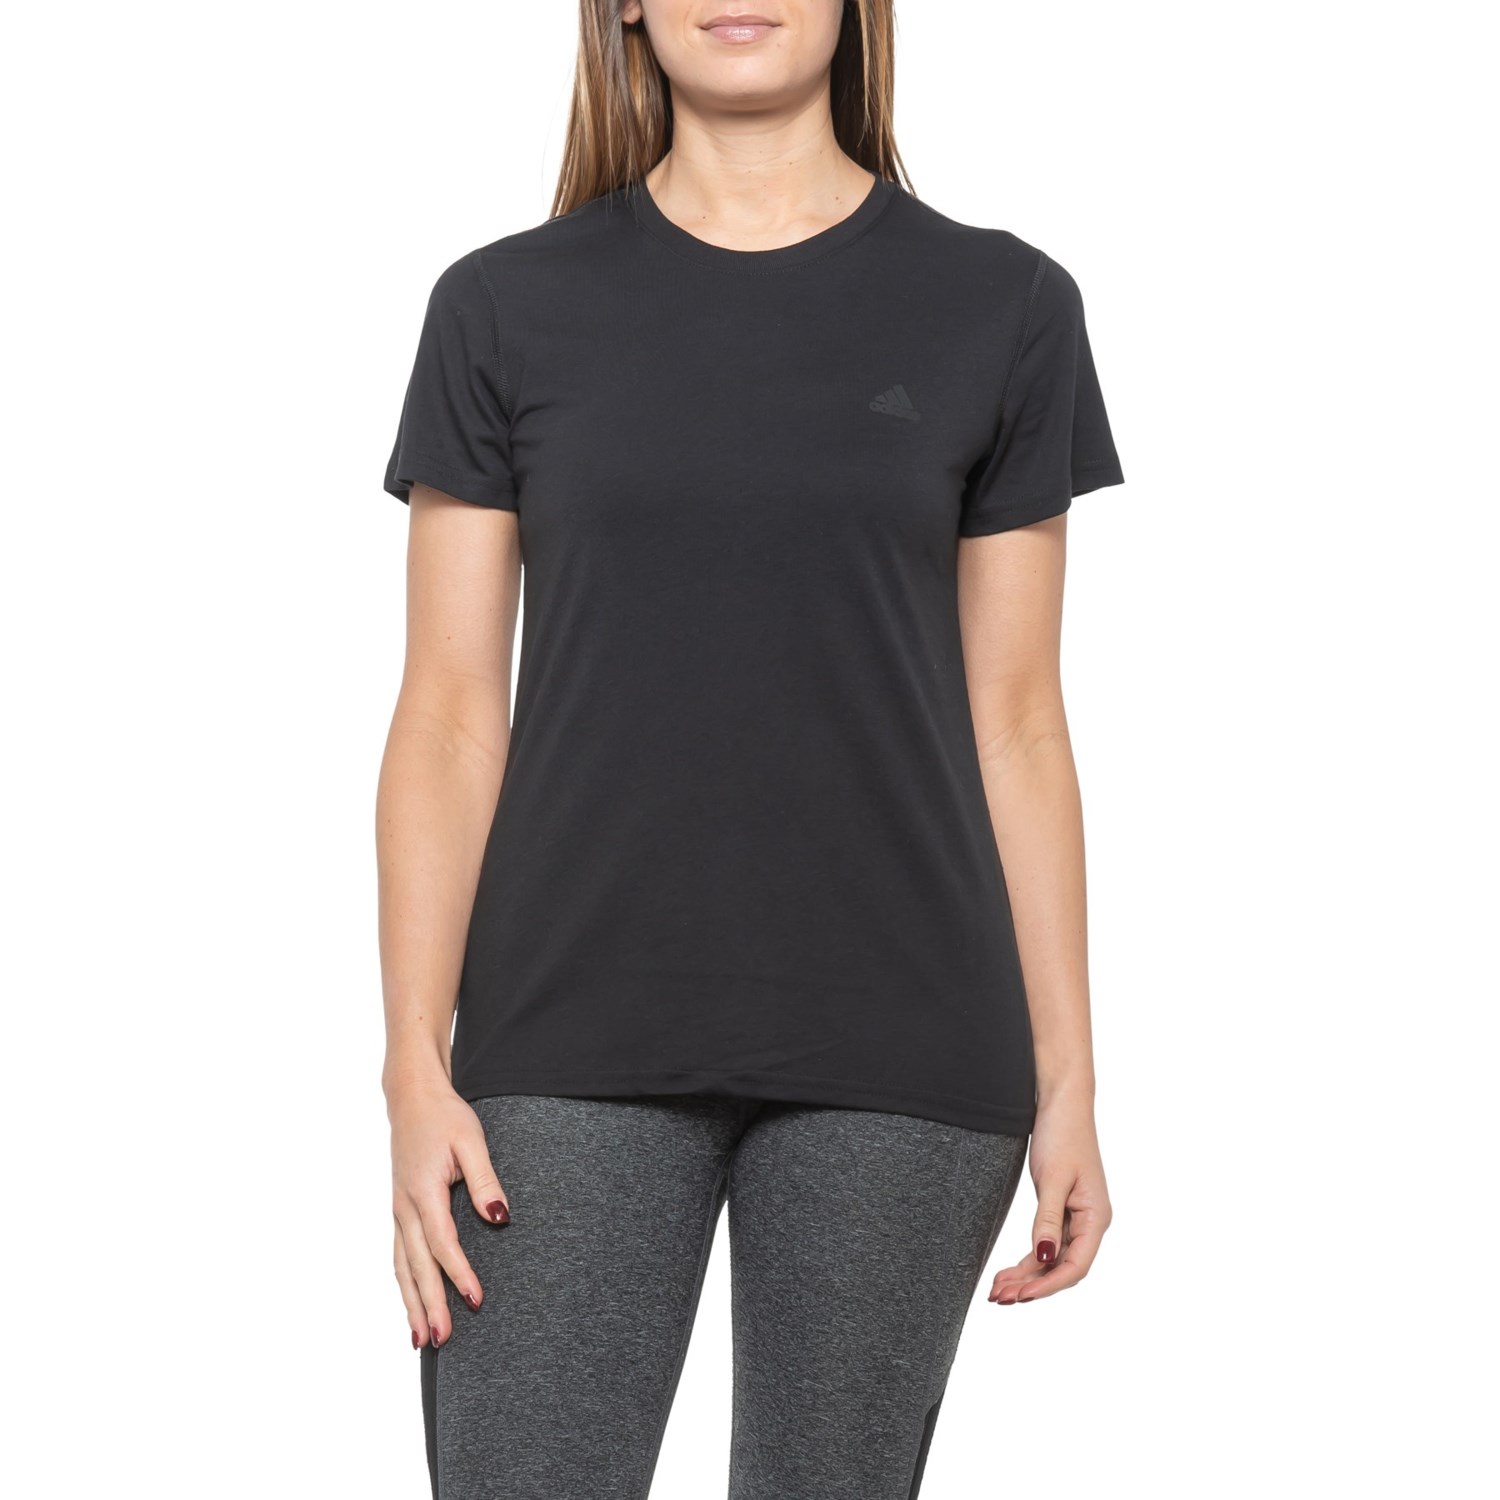 Adidas Ultimate T Shirt For Women Save 28